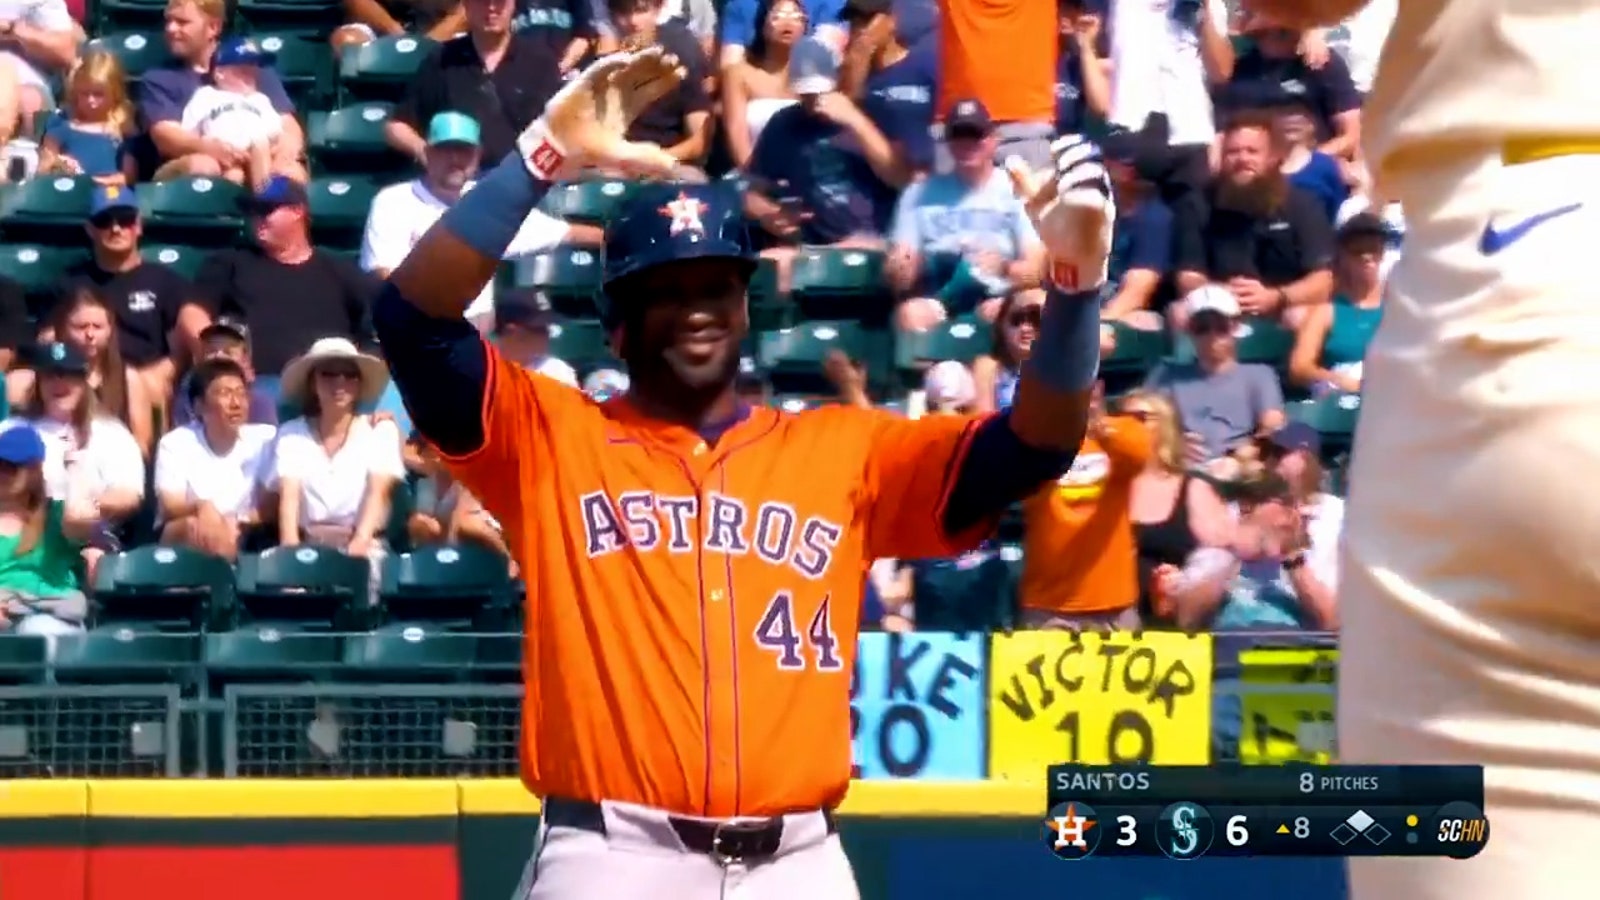 Astros' Yordan Álvarez hits a double to complete the cycle vs. Mariners